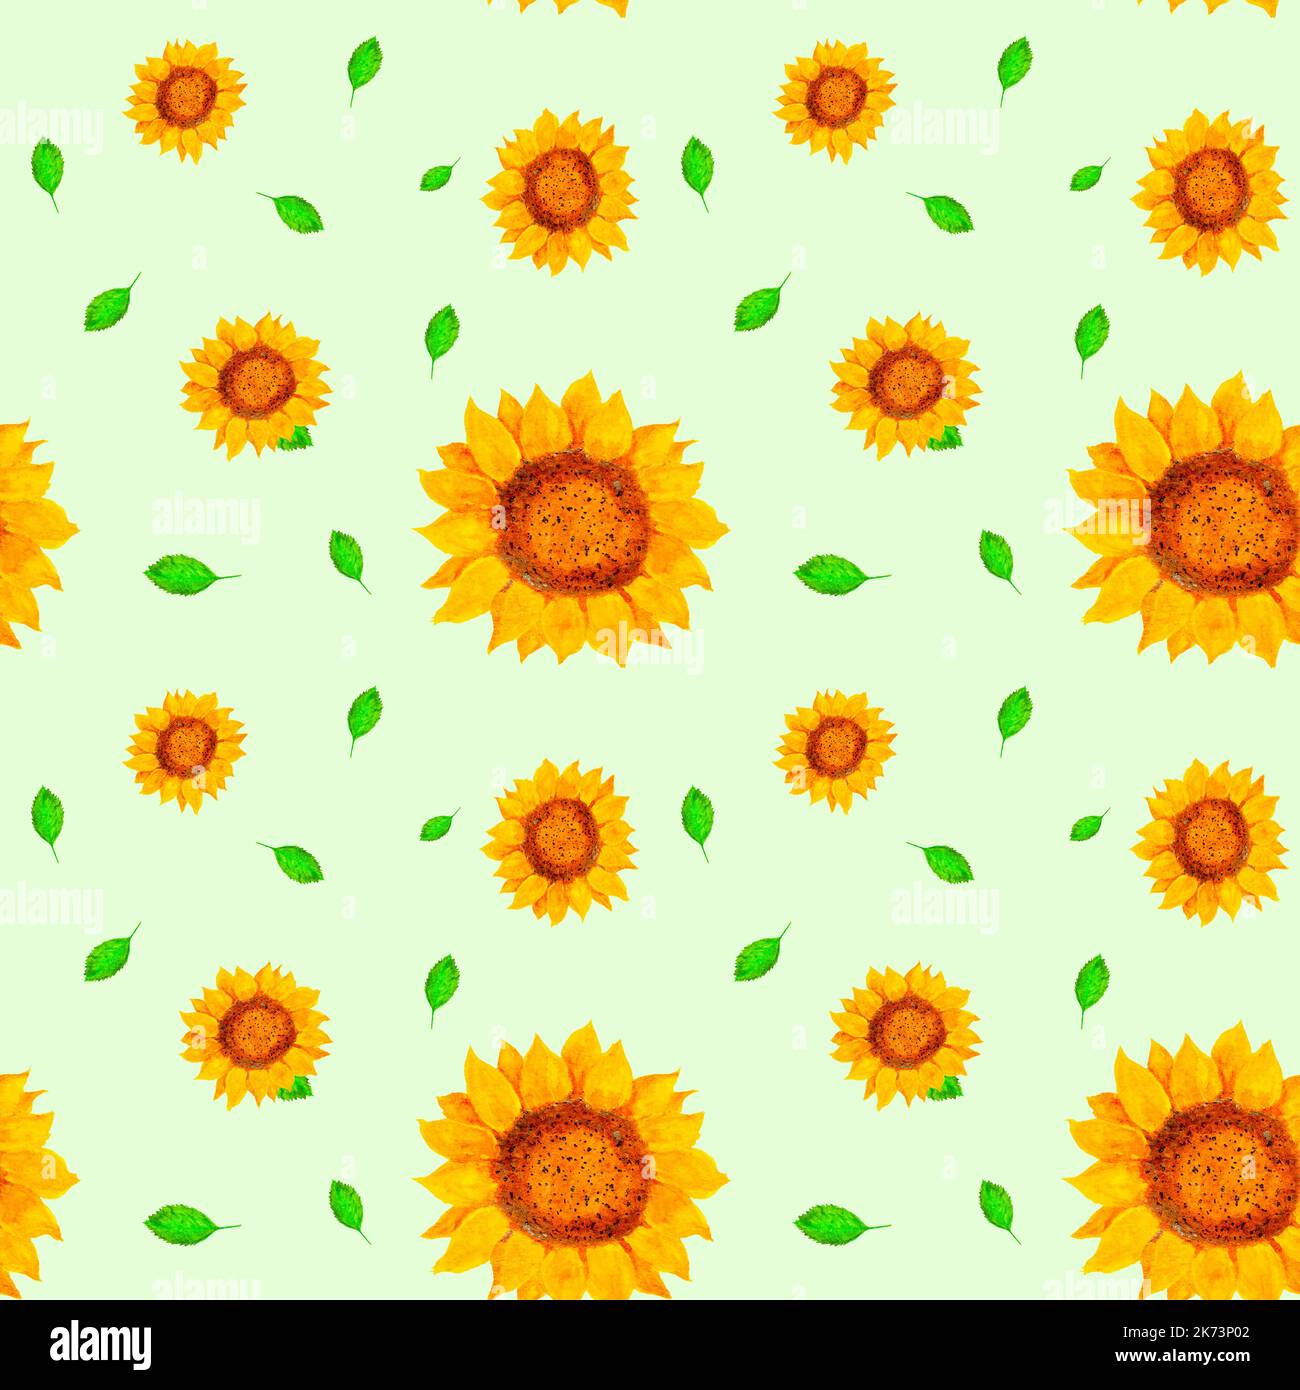 Sunflowers background, seamless watercolor background with sunflowers and green leaves, watercolor raster seamless illustration for Thanksgiving day a Stock Photo